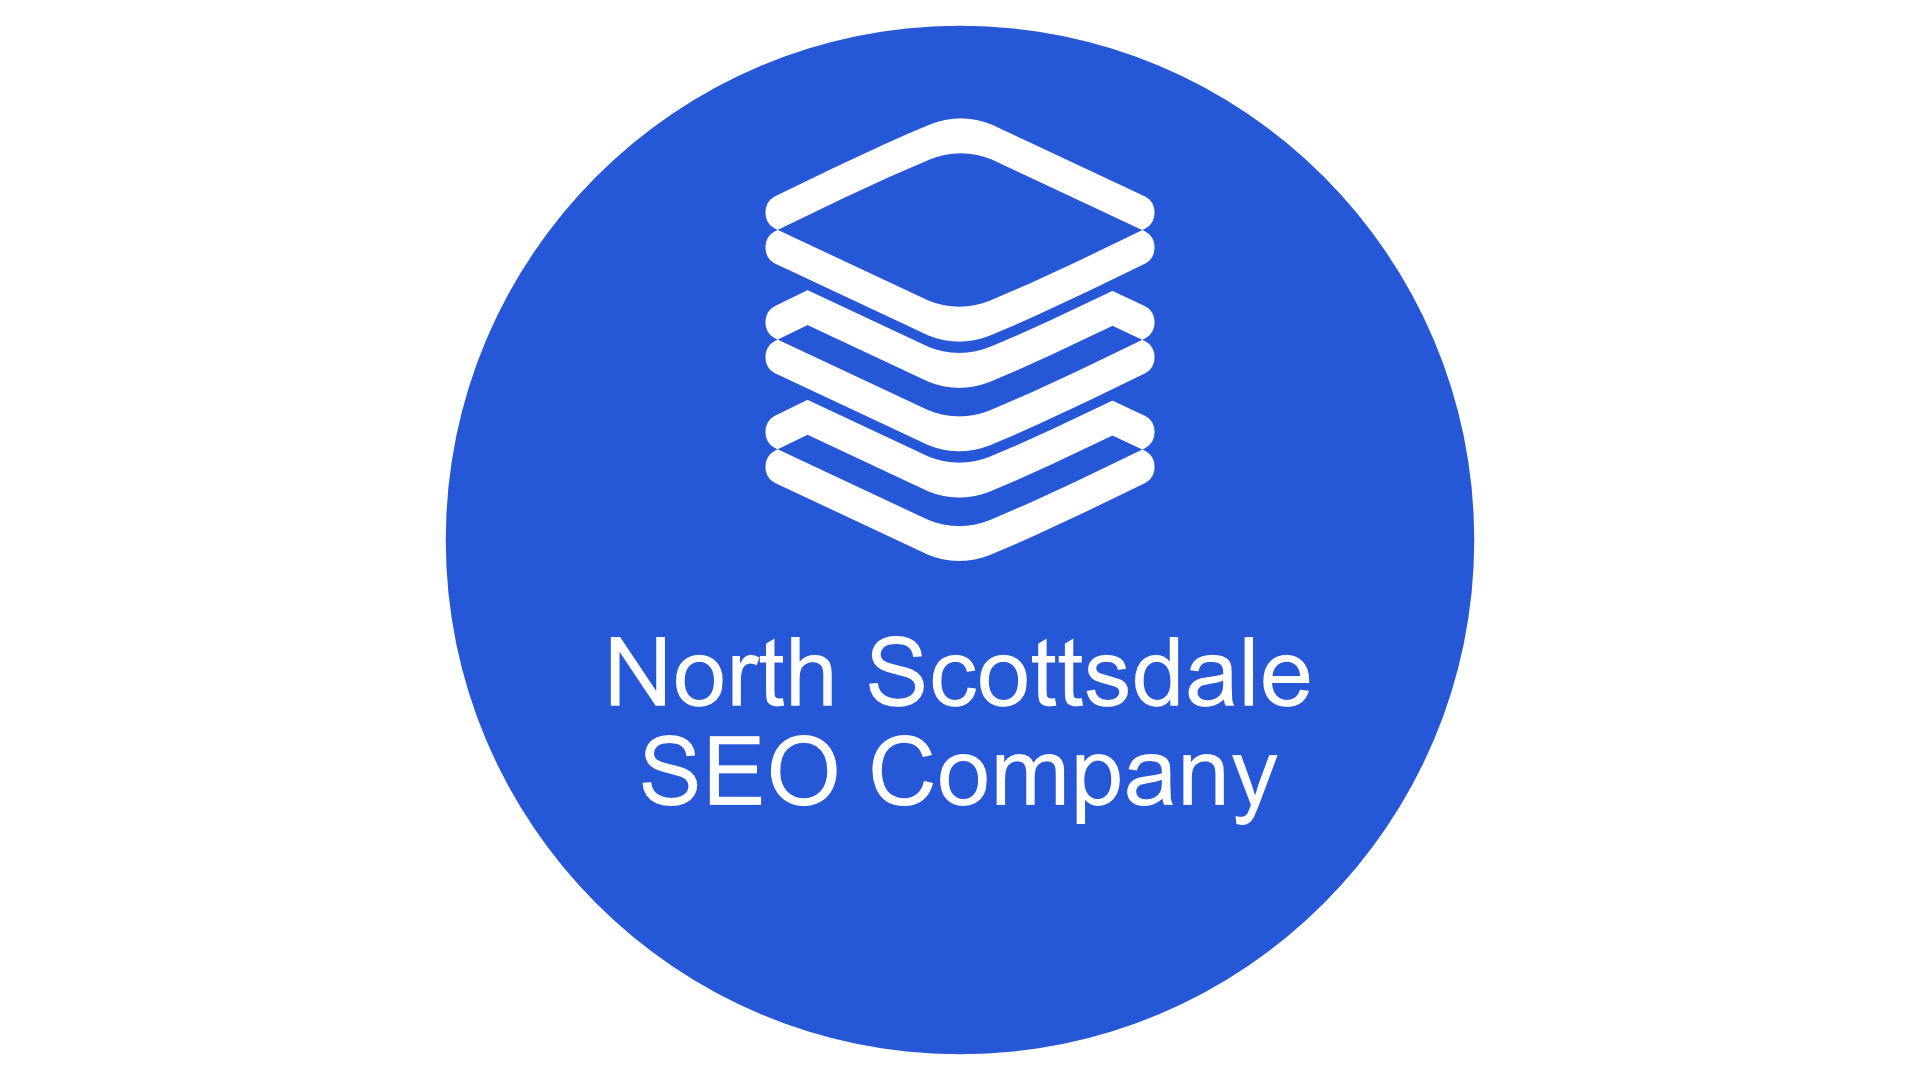 North Scottsdale SEO Company Logo with text